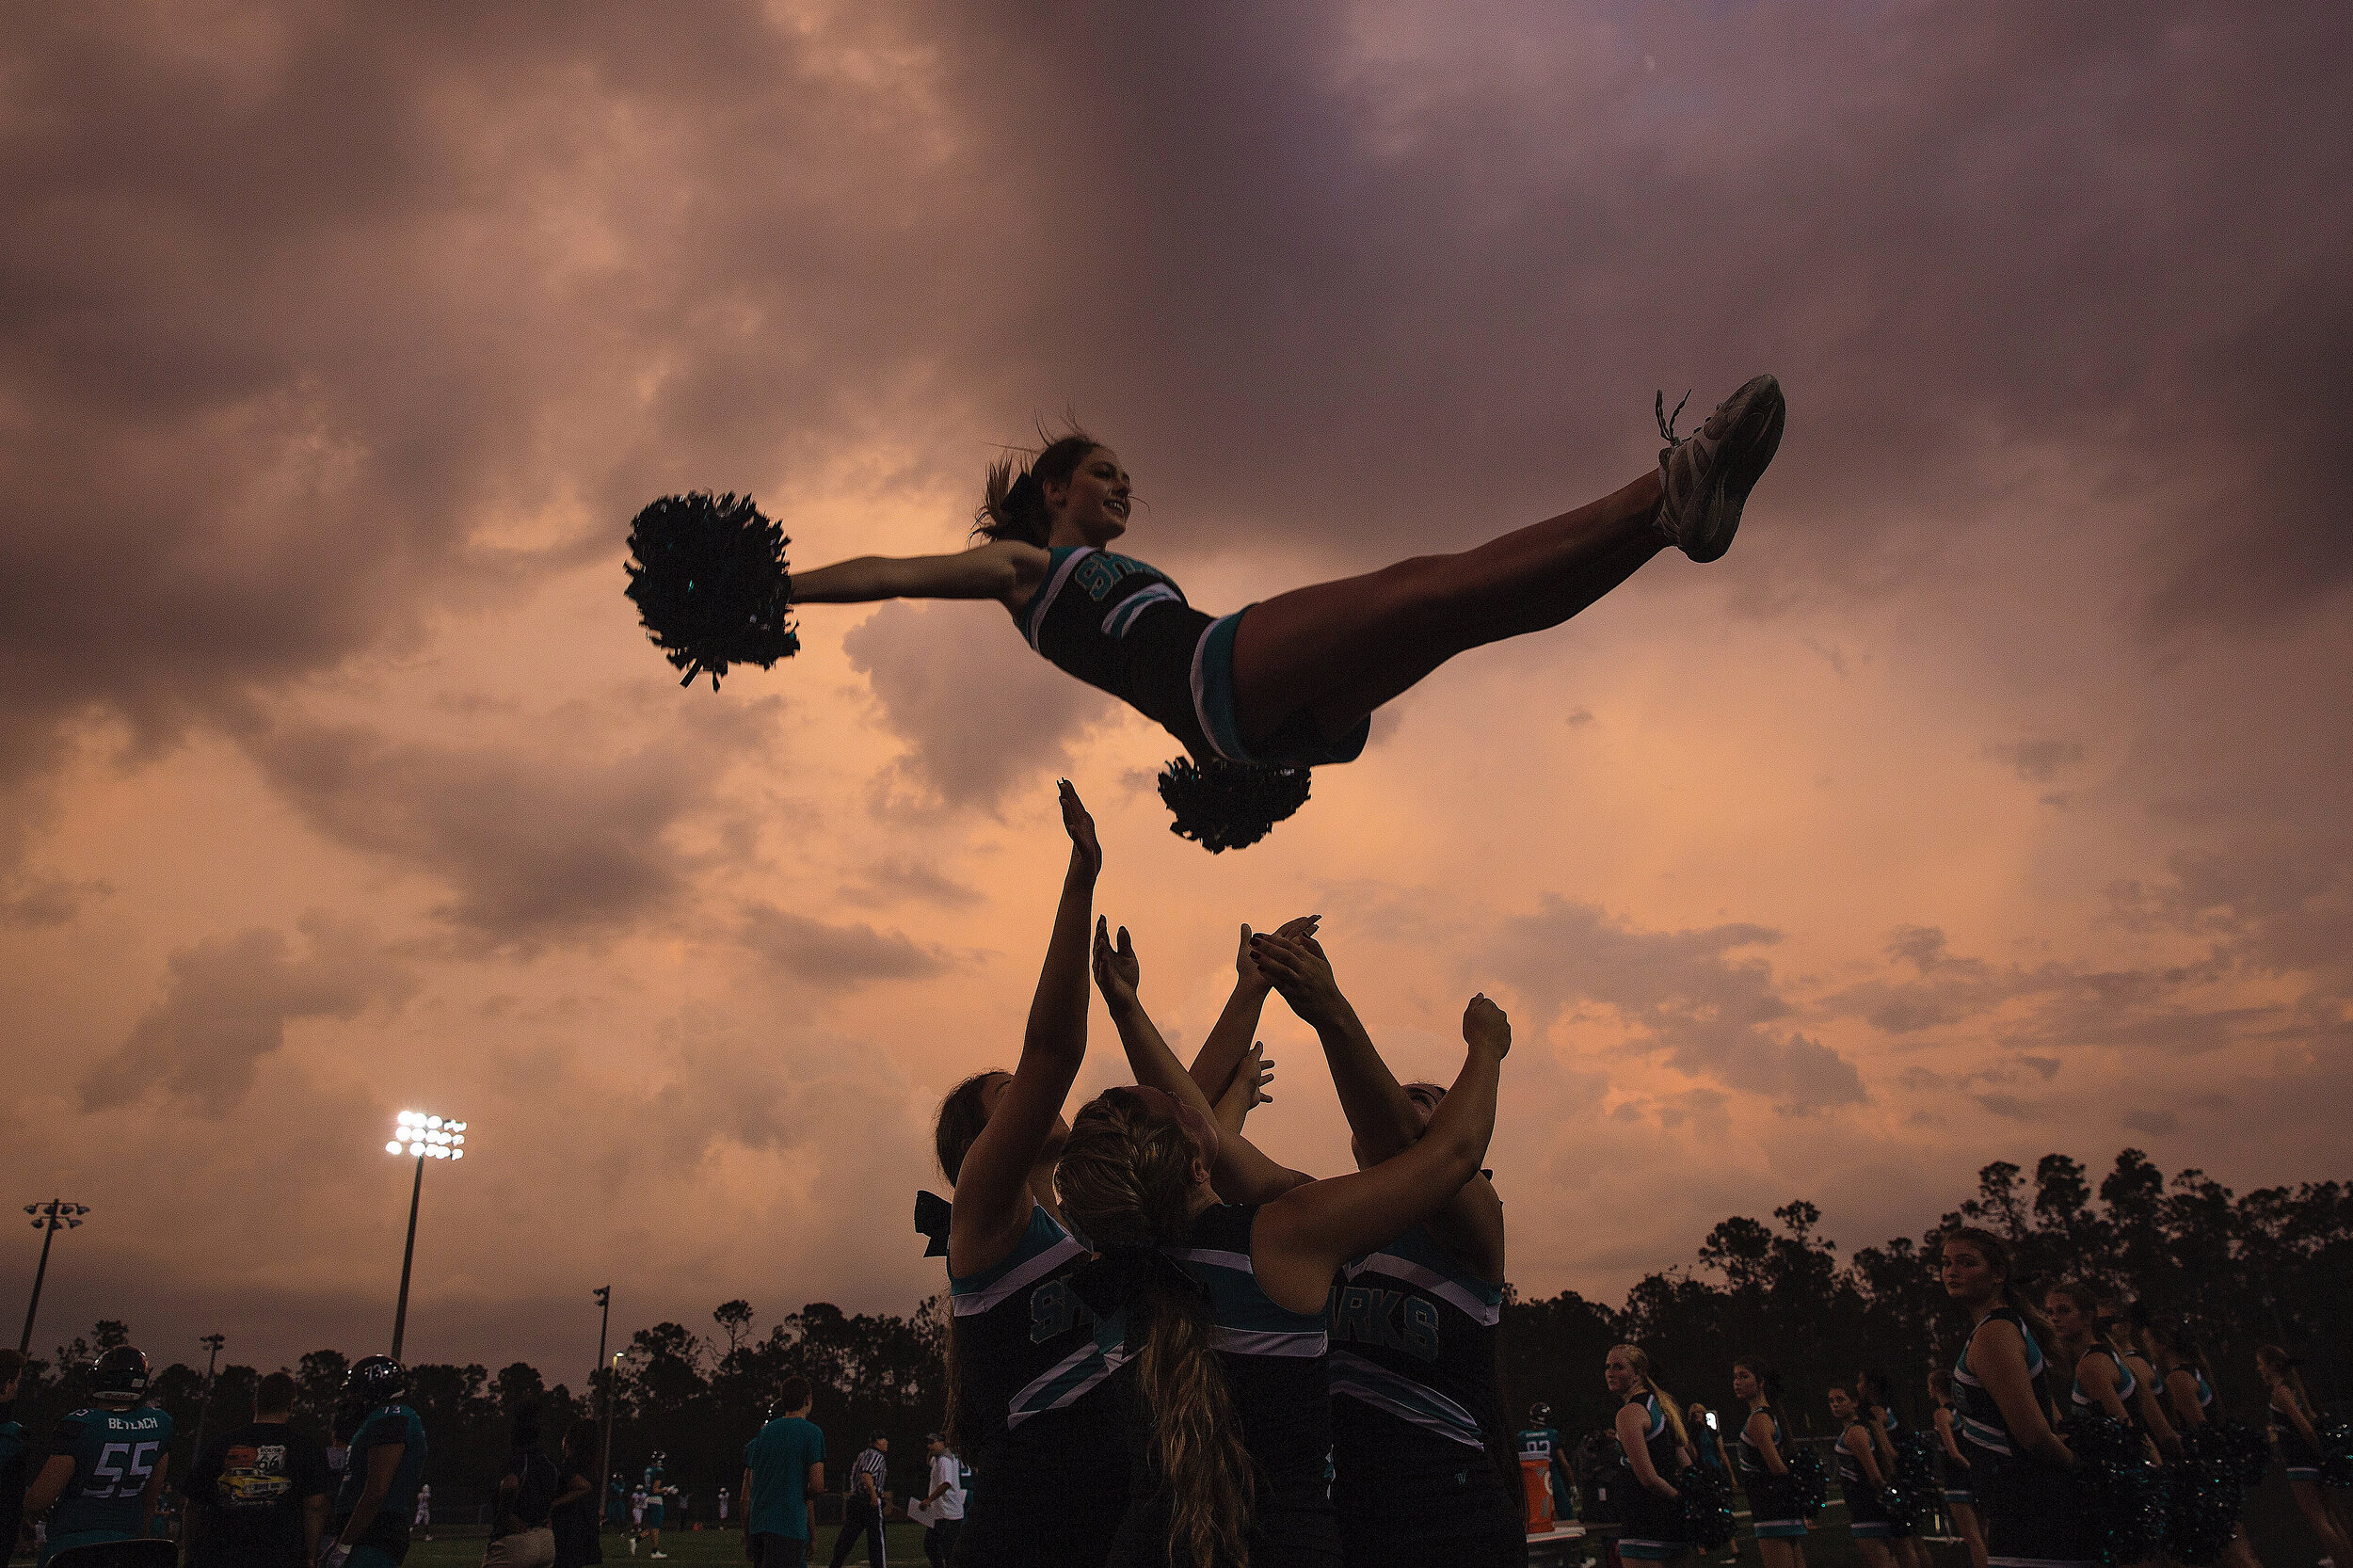  Gulf Coast High School cheerleaders pumped up the crowd at Golden Gate High School in Naples where the Sharks took on the Riverdale Raiders on Thursday, September 28, 2017. For Naples Daily News. 